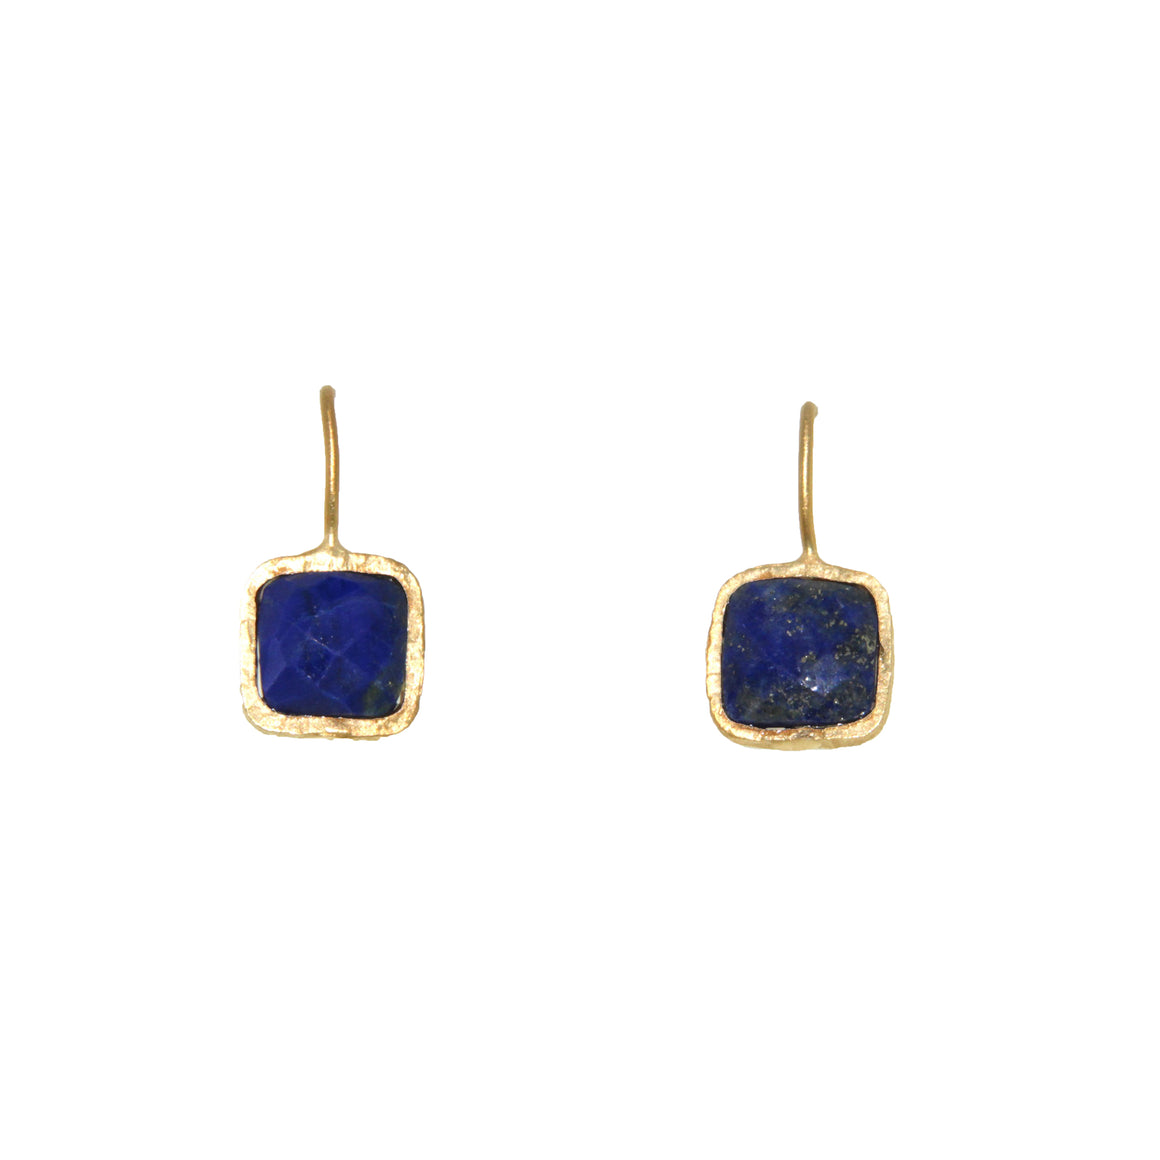 A checker cut faceted Lapis Earring set in 22 carat Vermeil over Sterling Silver. With a wire hook, the earring sits just below the ear lobe.